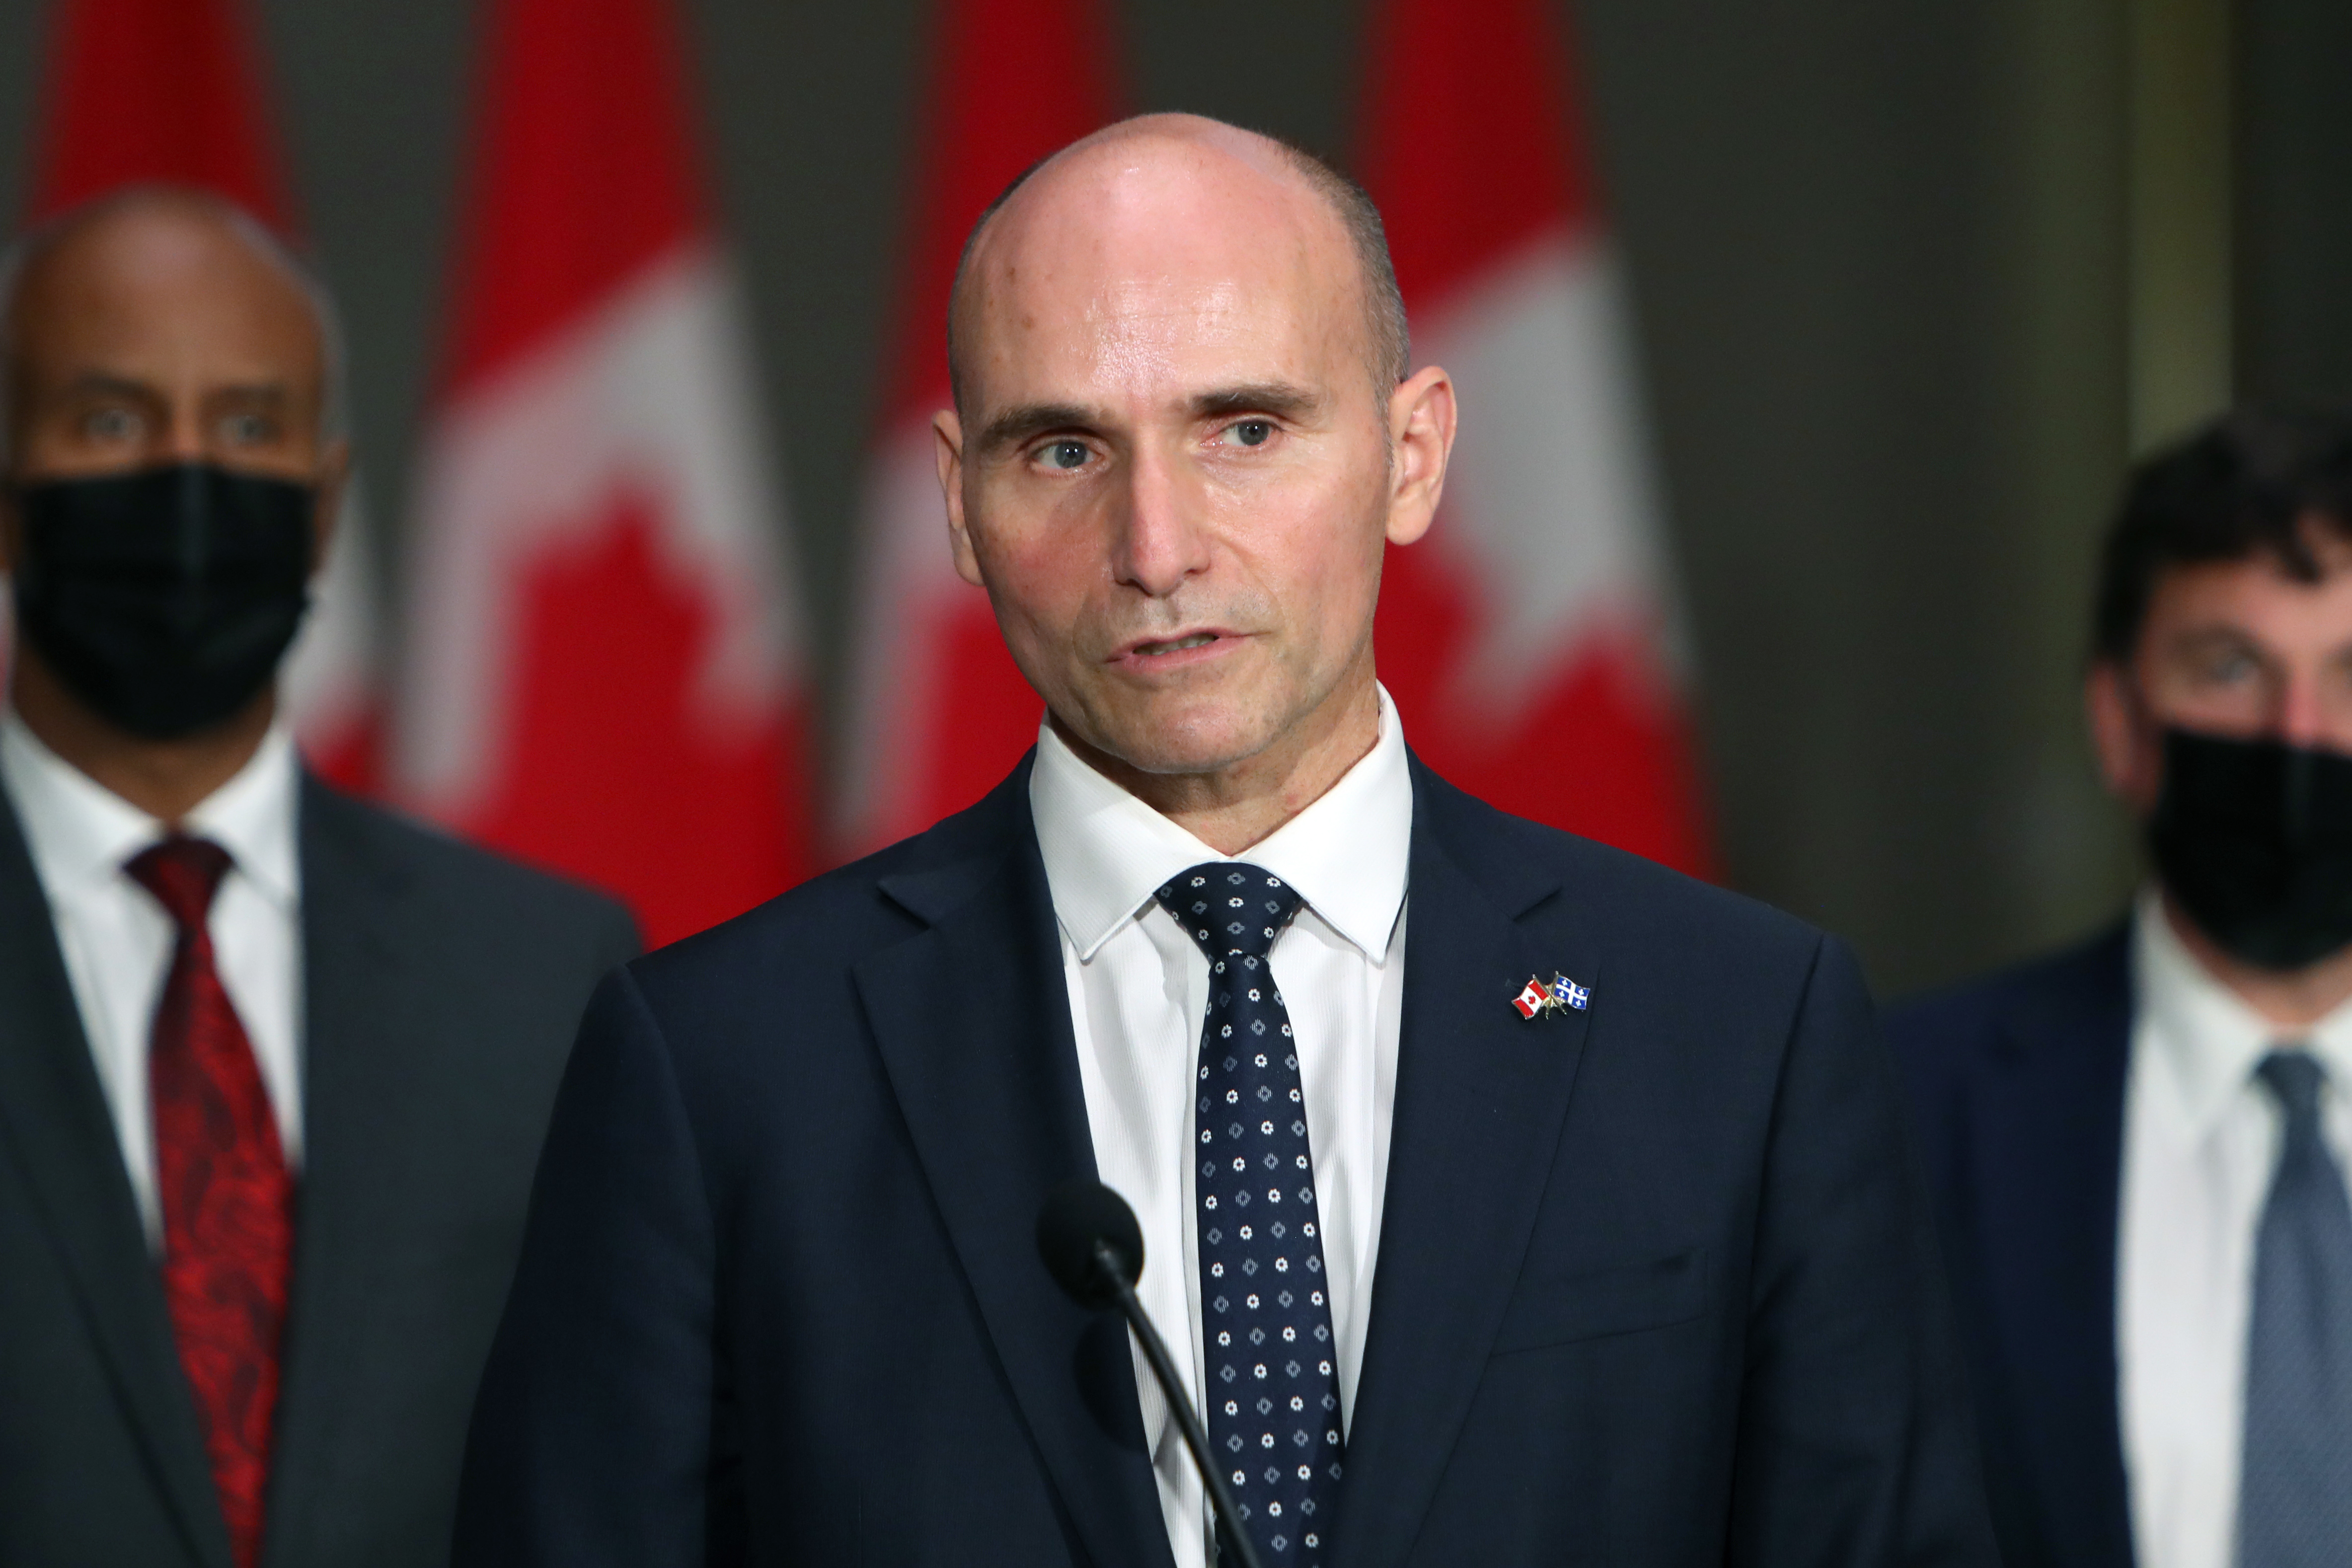 Jean-Yves Duclos, Canada's health minister, speaks during a news conference in Ottawa, Ontario, Canada, on Tuesday, Oct. 26, 2021. 